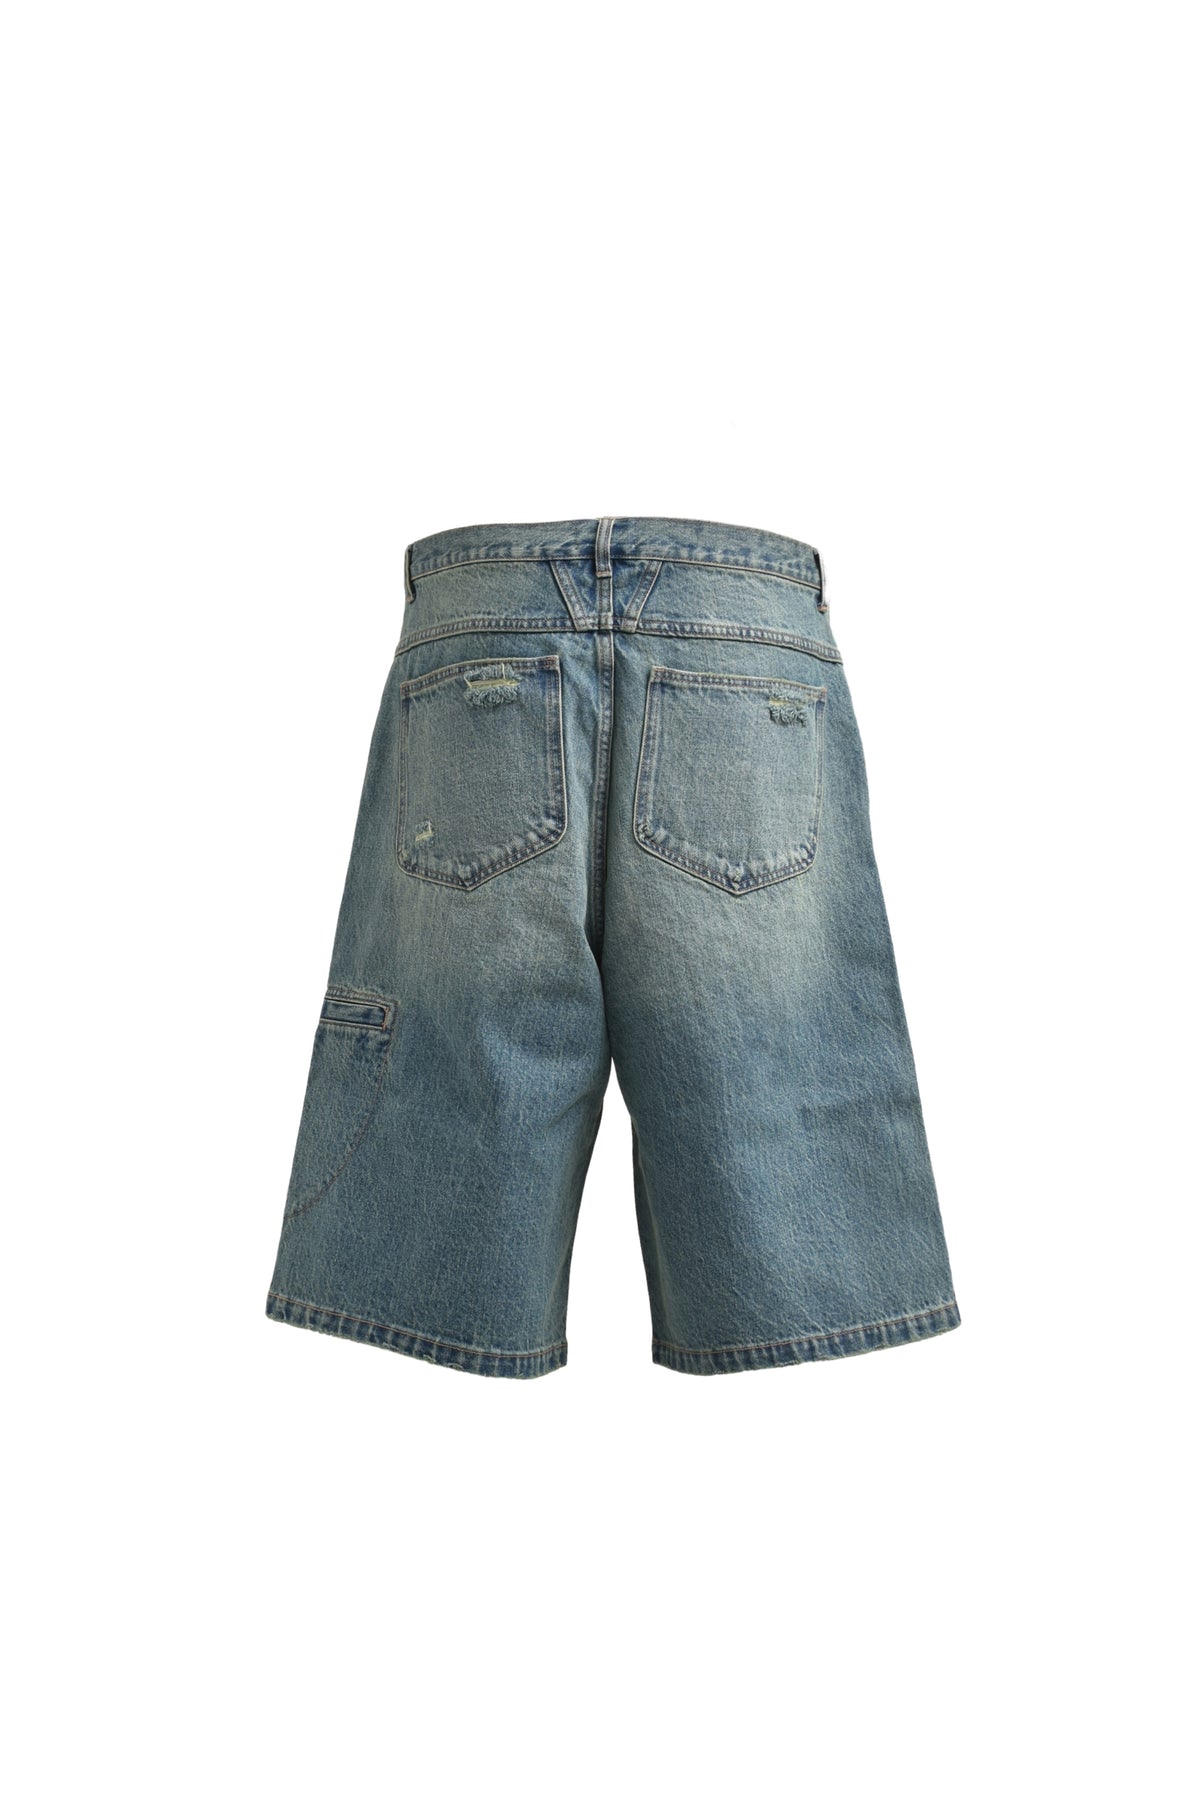 BREATH X JEANS SHORTS / IND